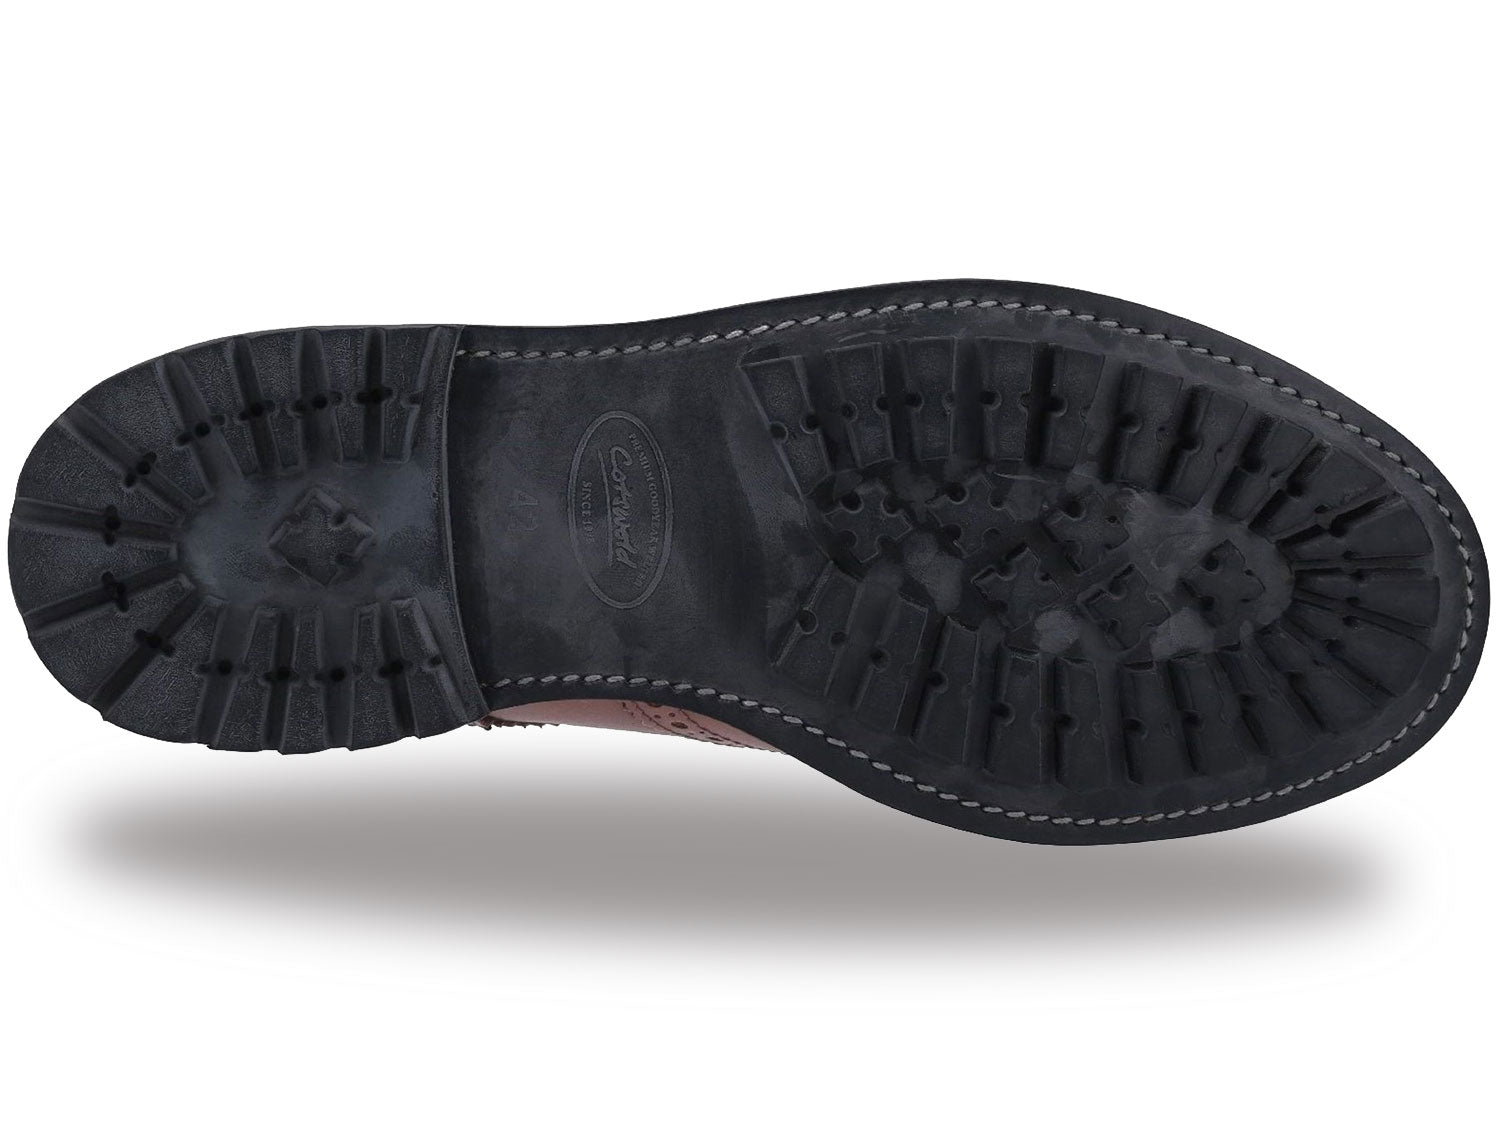 Welted commando sole 